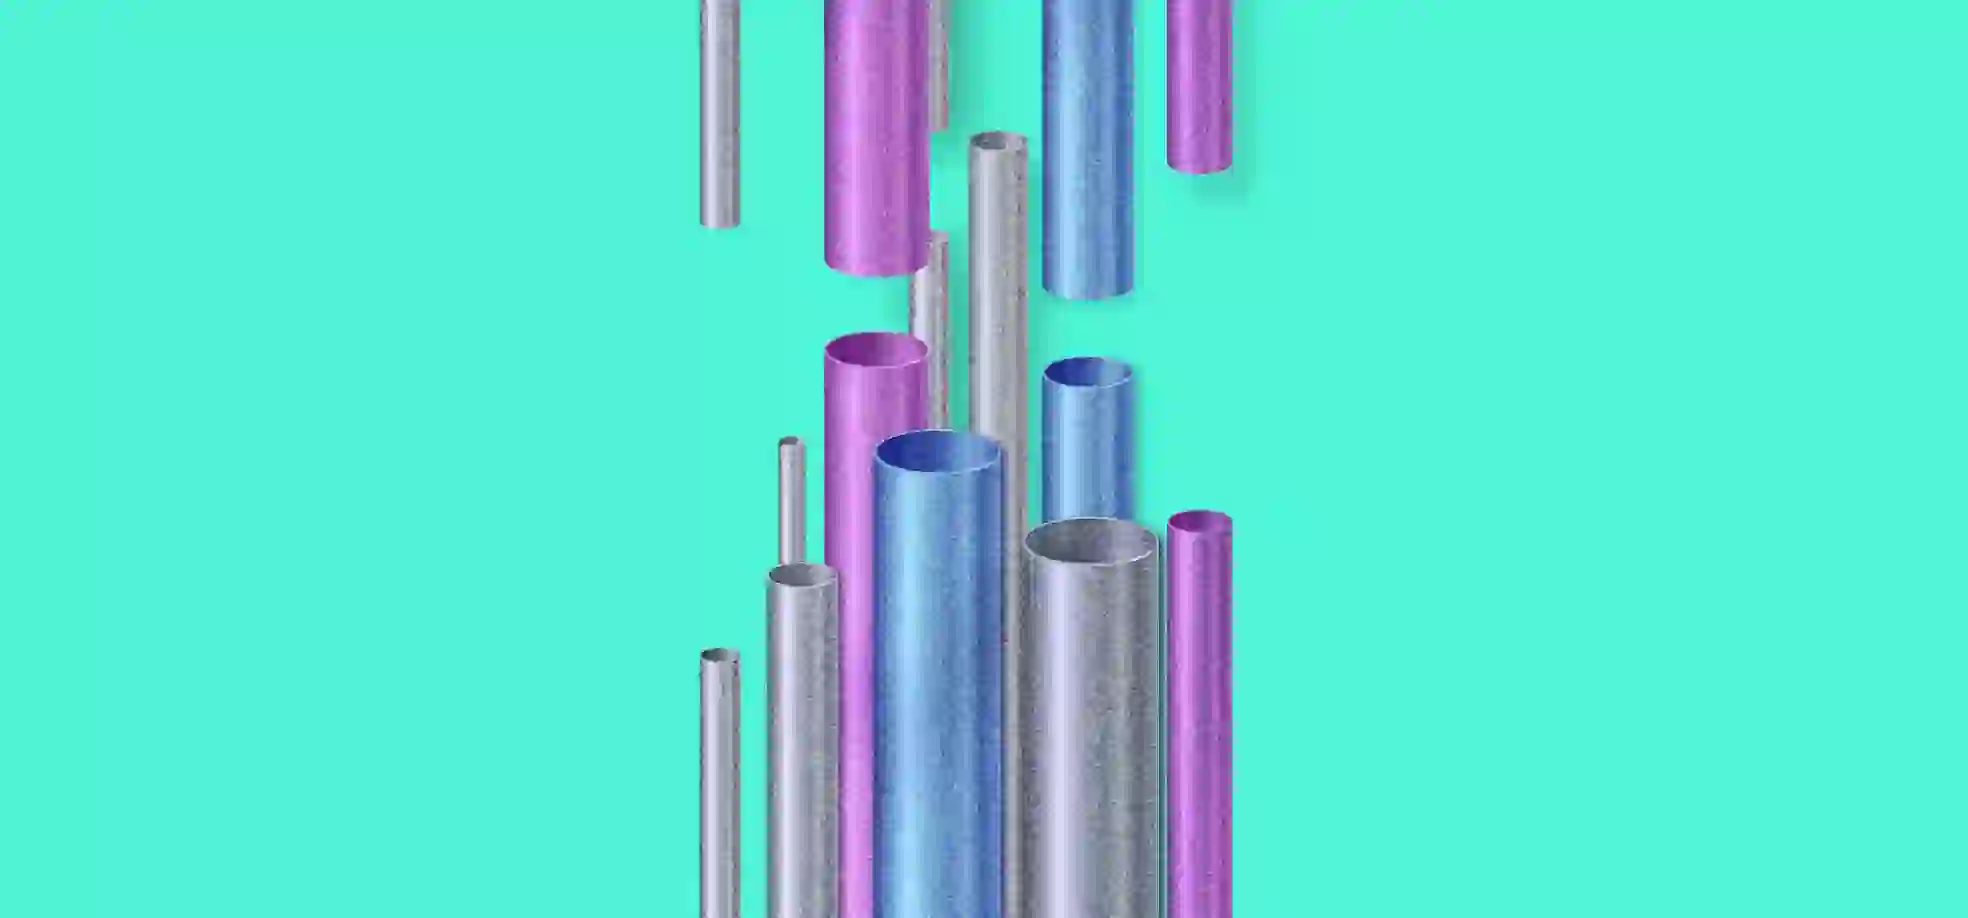 illustration of tubes towards each other